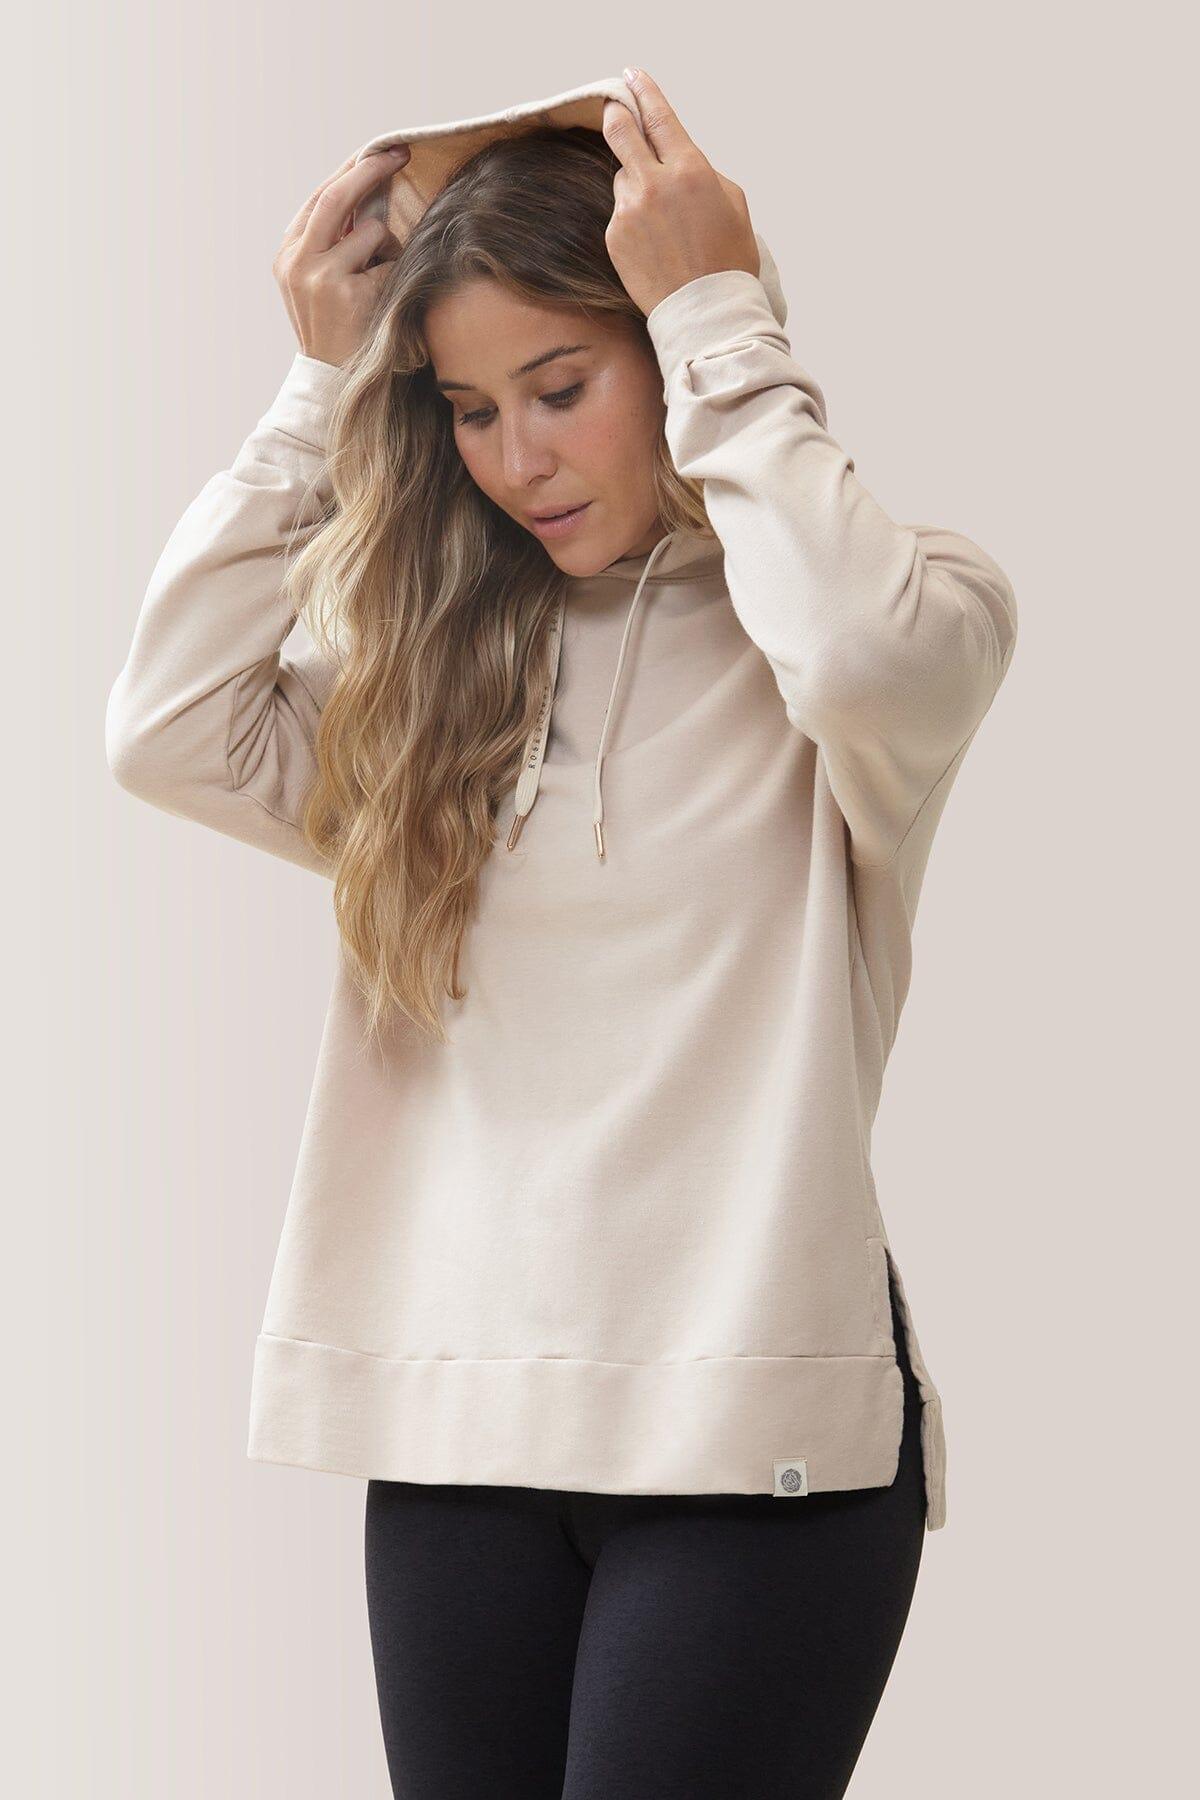 Femme qui porte le chandail Chill out de Rose Boreal./ Women wearing the Chill Out Hoodie by Rose Boreal. -Sand Beige